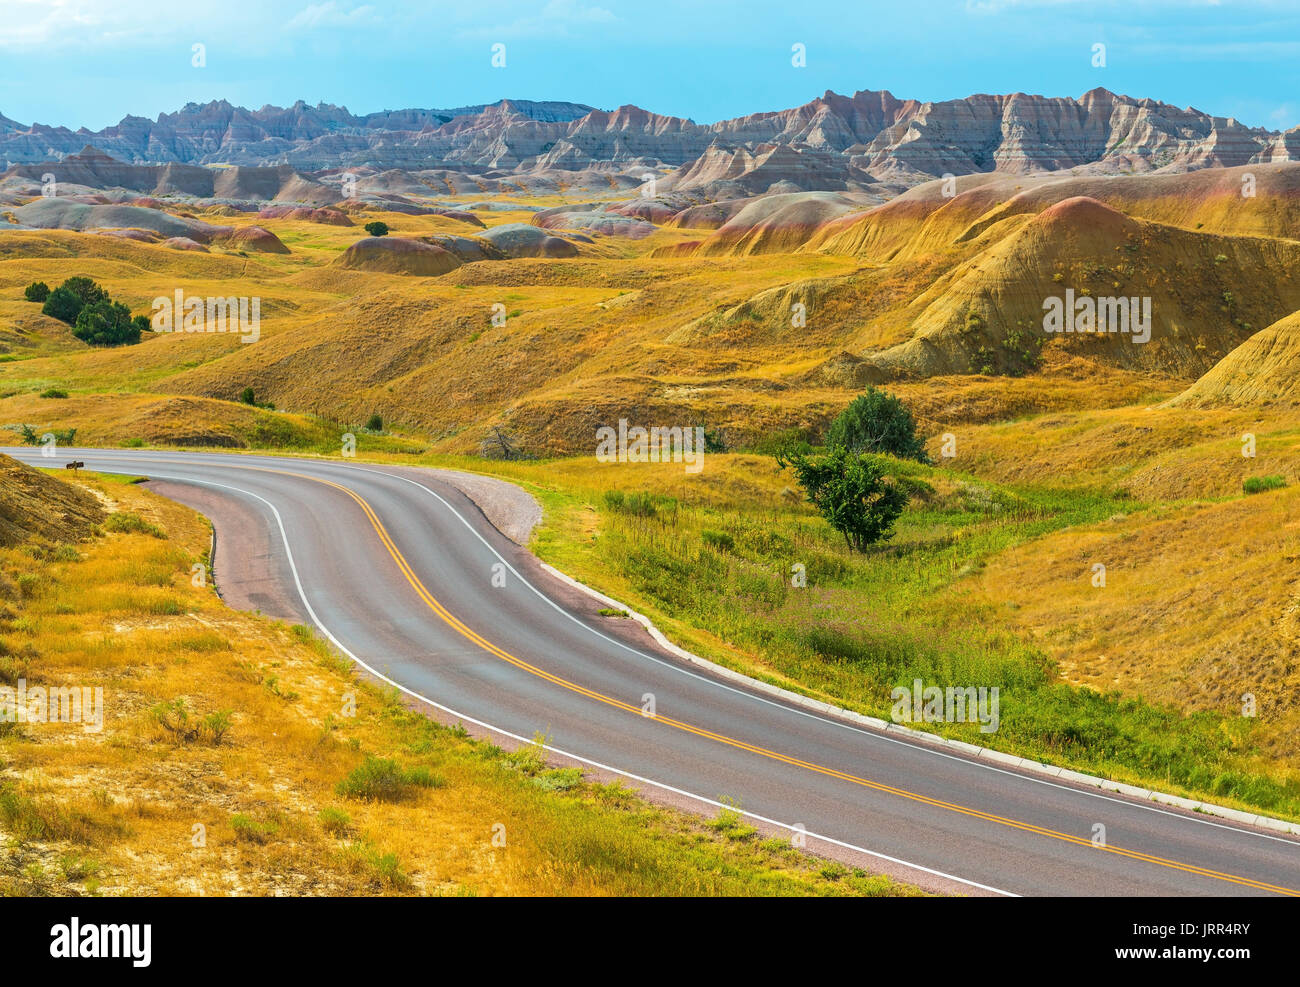 Yellow mountain road with geological stone formations inside Badlands National Park near Rapid City in the state of South Dakota, USA. Stock Photo